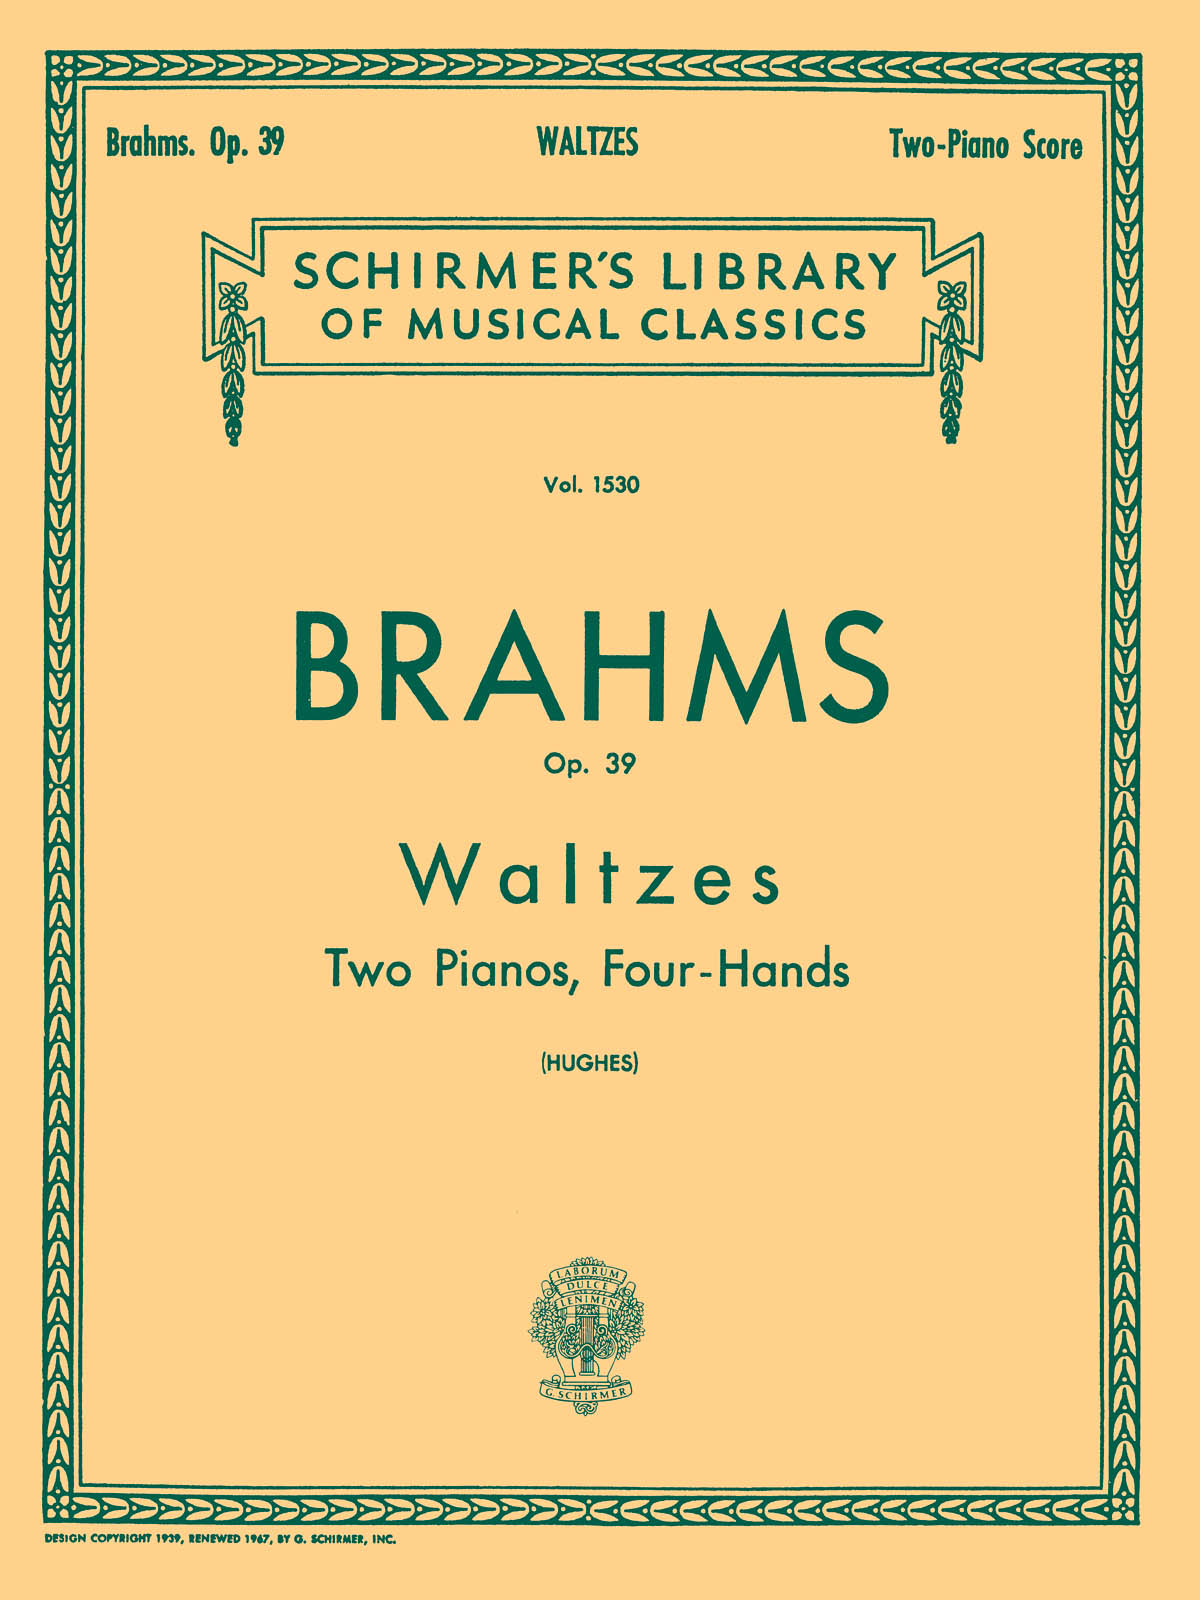 Waltzes Op.39 - Two Pianos, Four Hands. Includes set of parts for each player. - pro čtyři ruce